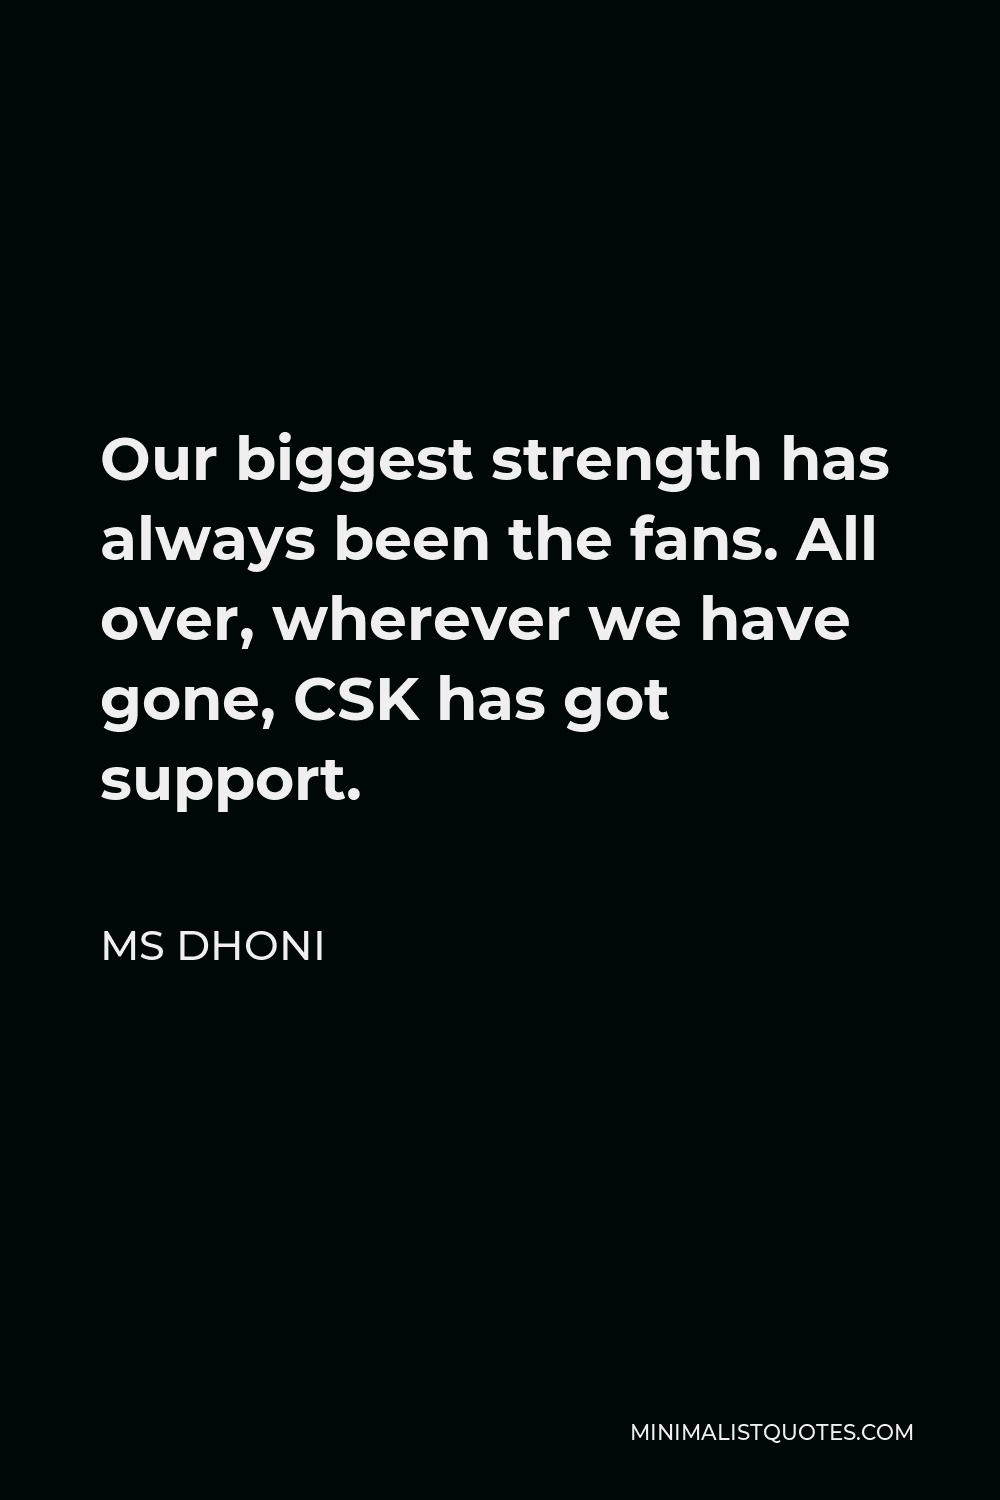 MS Dhoni Quote - Our biggest strength has always been the fans. All over, wherever we have gone, CSK has got support.